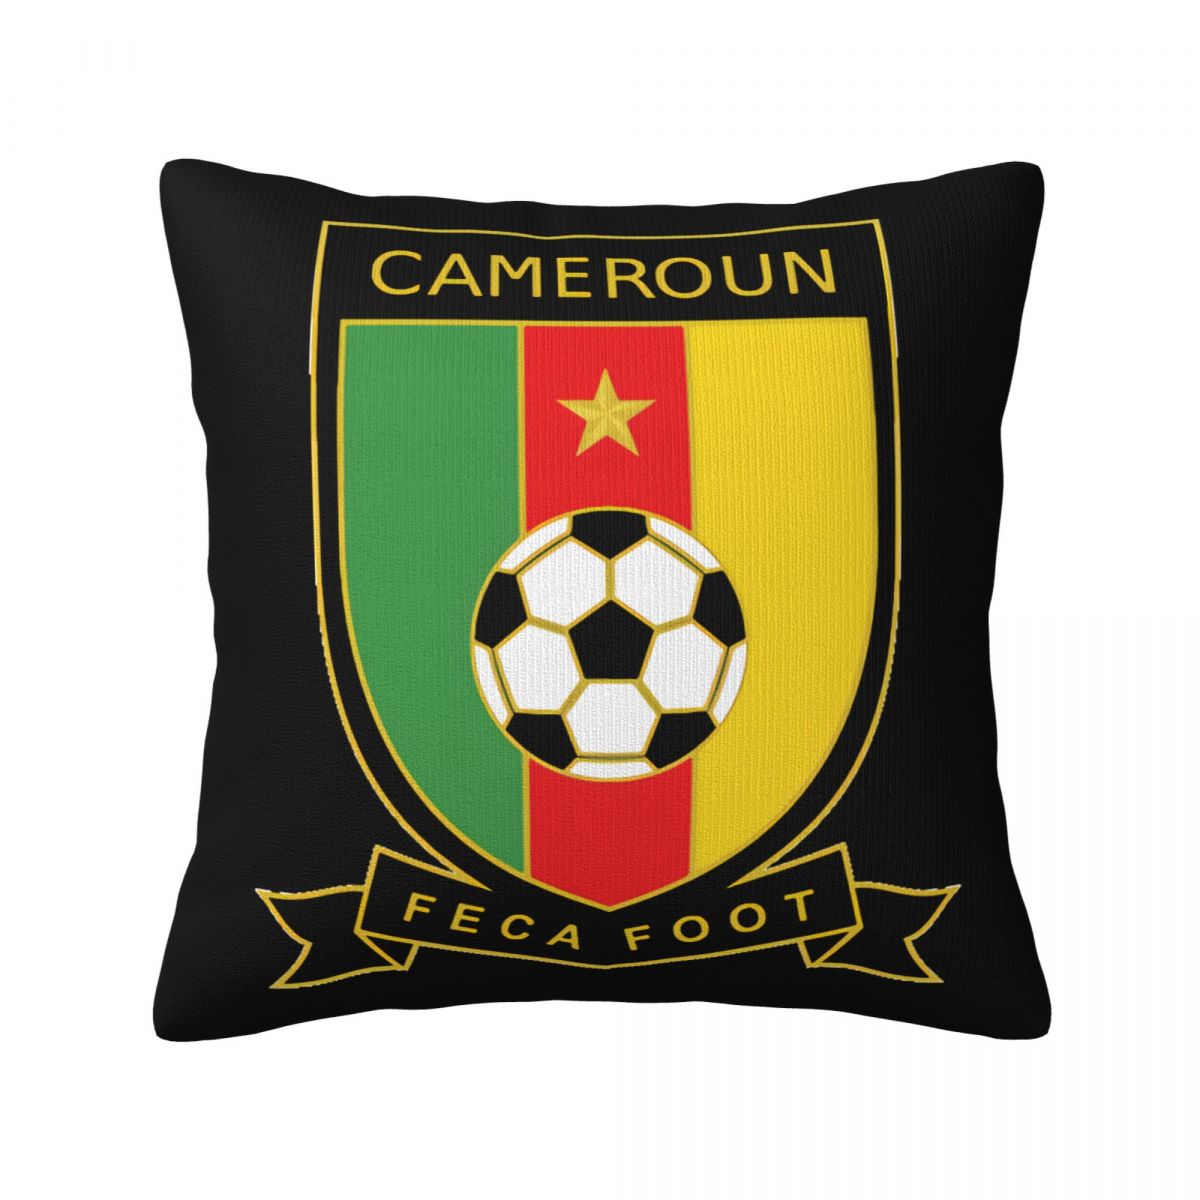 Cameroon National Football Team Decorative Square Throw Pillow Covers